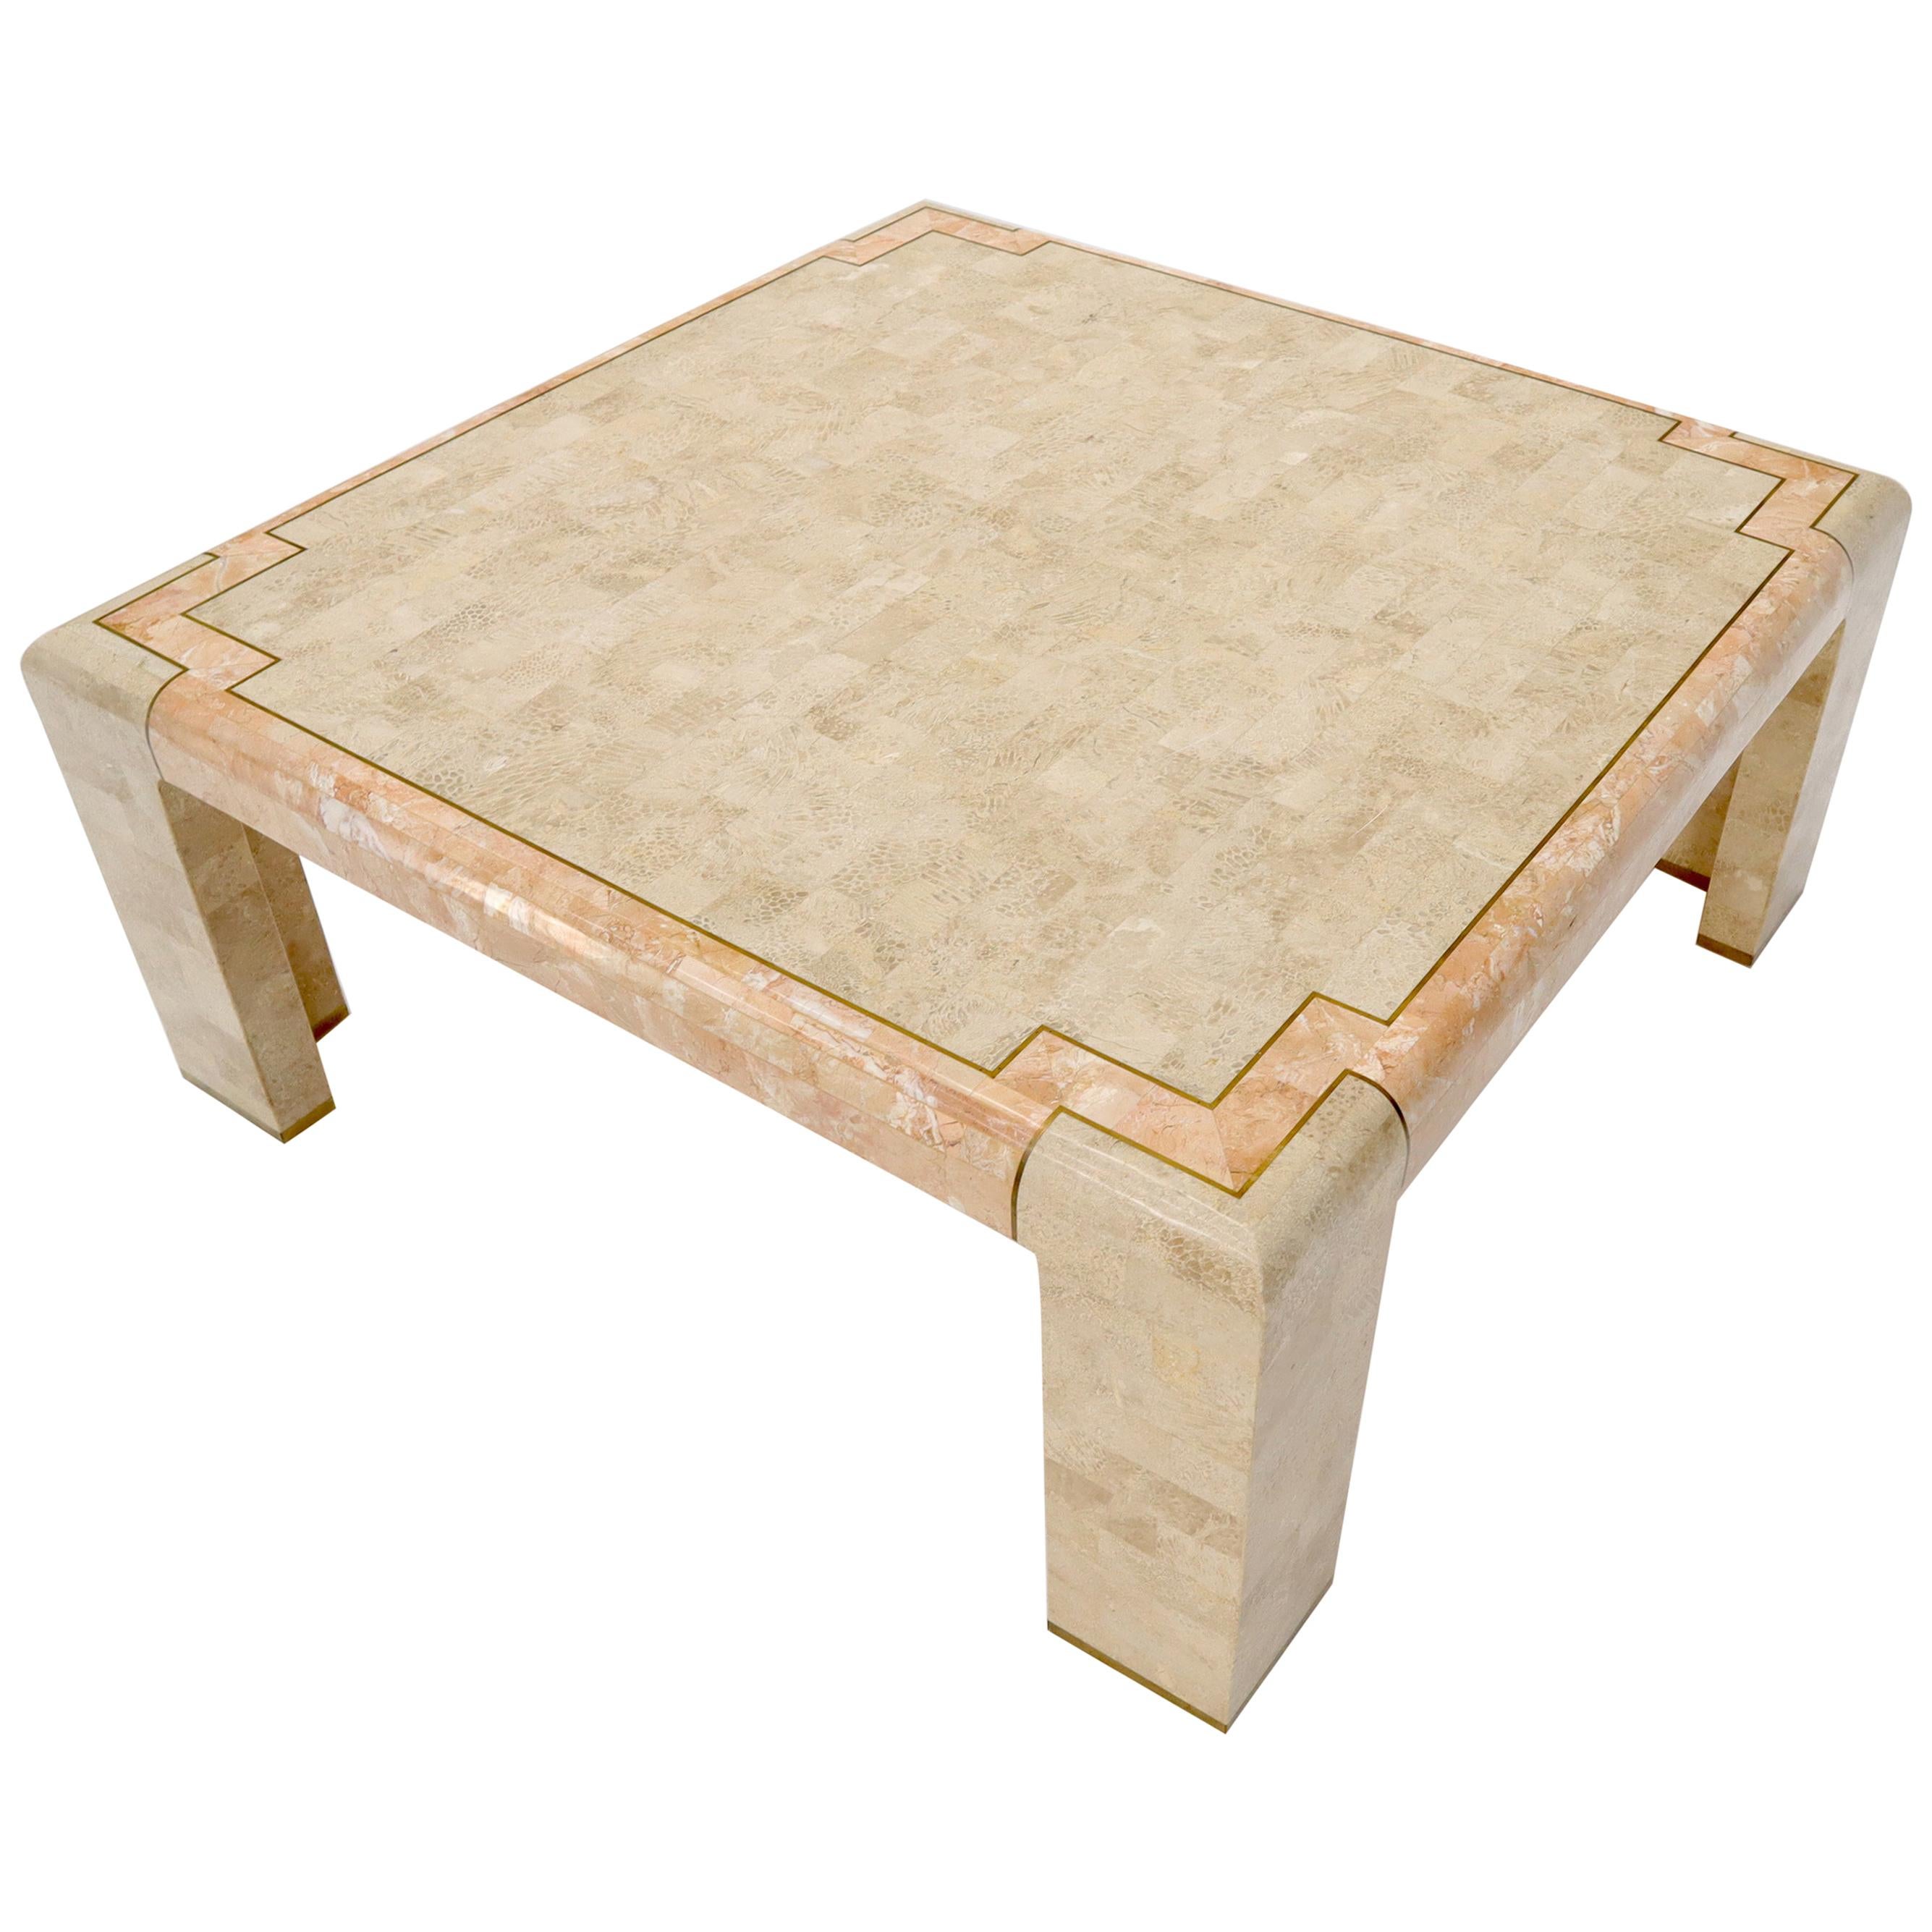 Tessellated Stone Brass Inlay Square Coffee Table